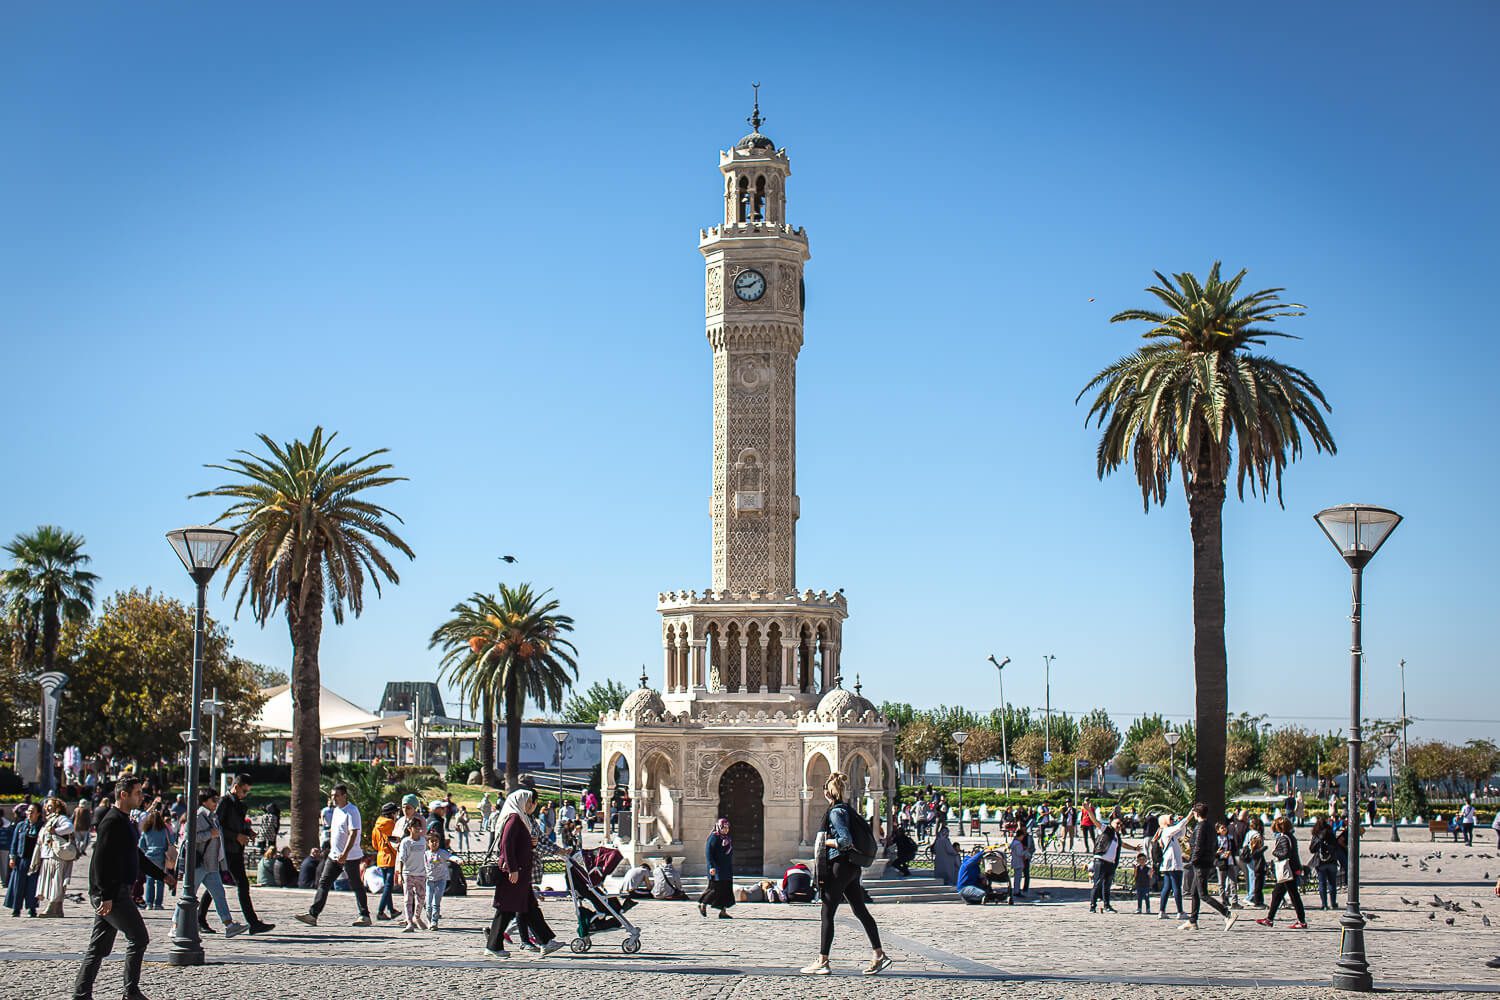 Izmir Clock Tower - one of the Best Things to do in Izmir